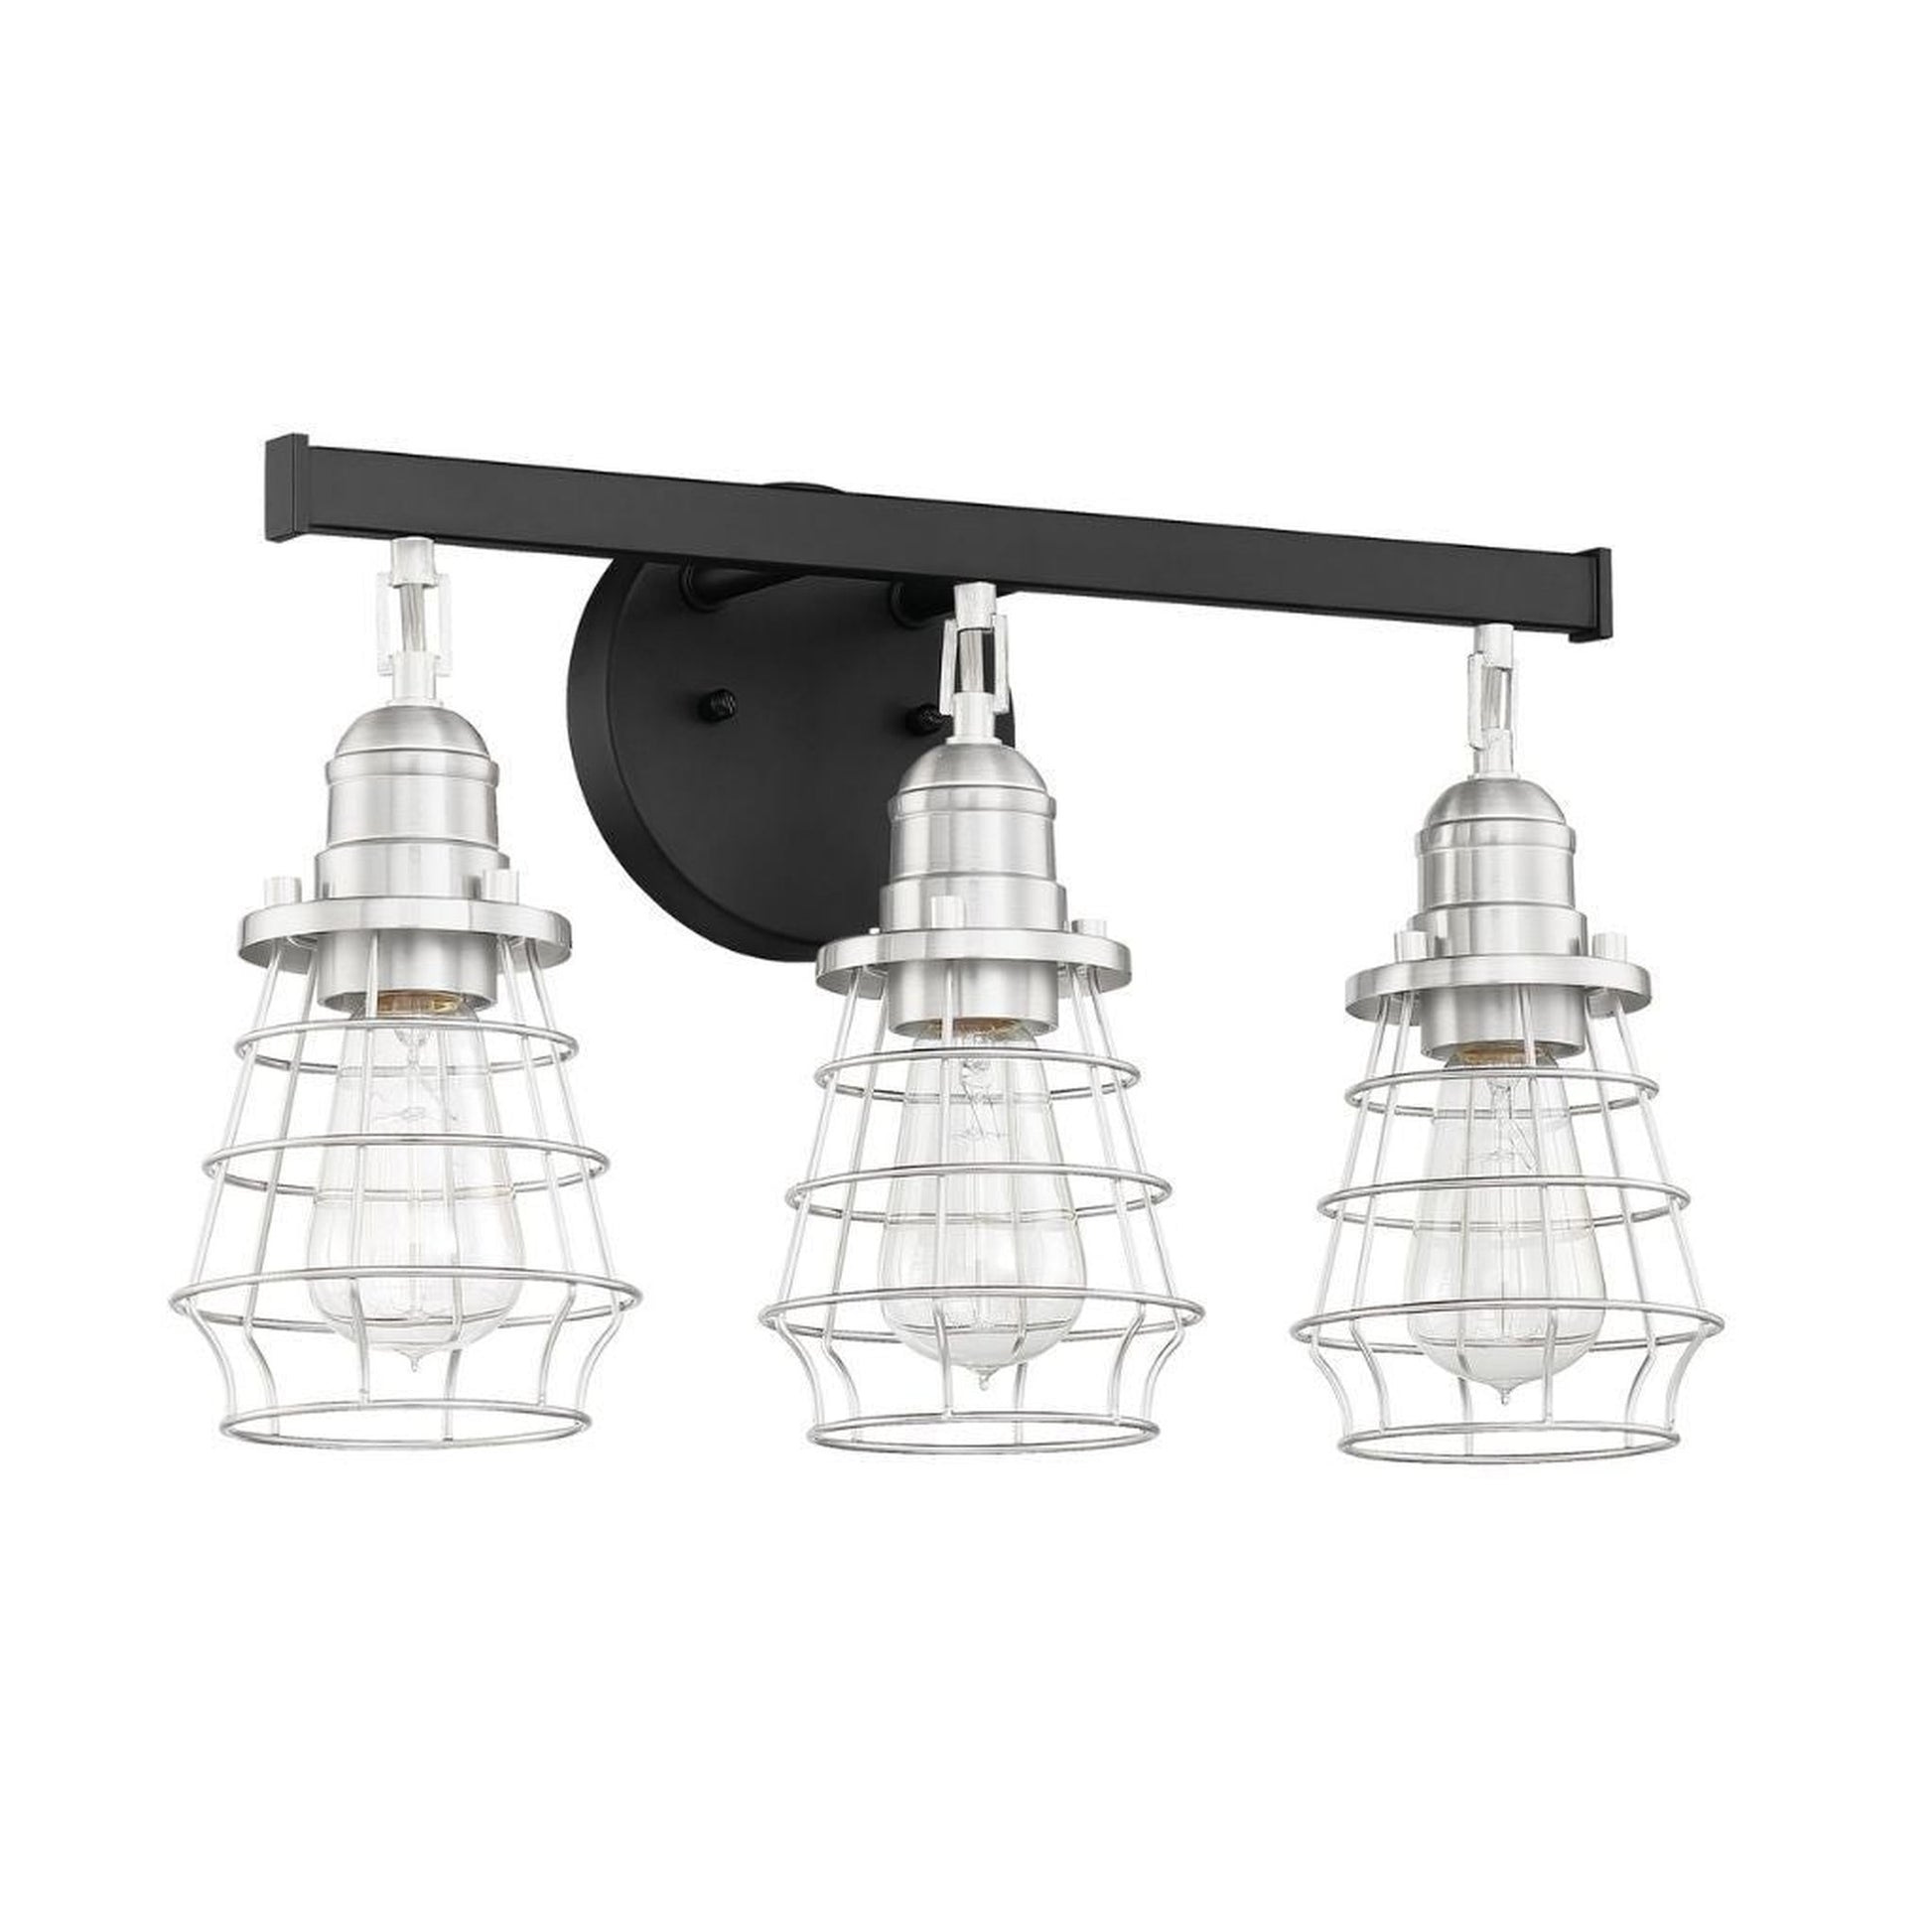 Craftmade Thatcher 19" 3-Light Flat Black Vanity Light With Brushed Polished Nickel Metal Wire Shades